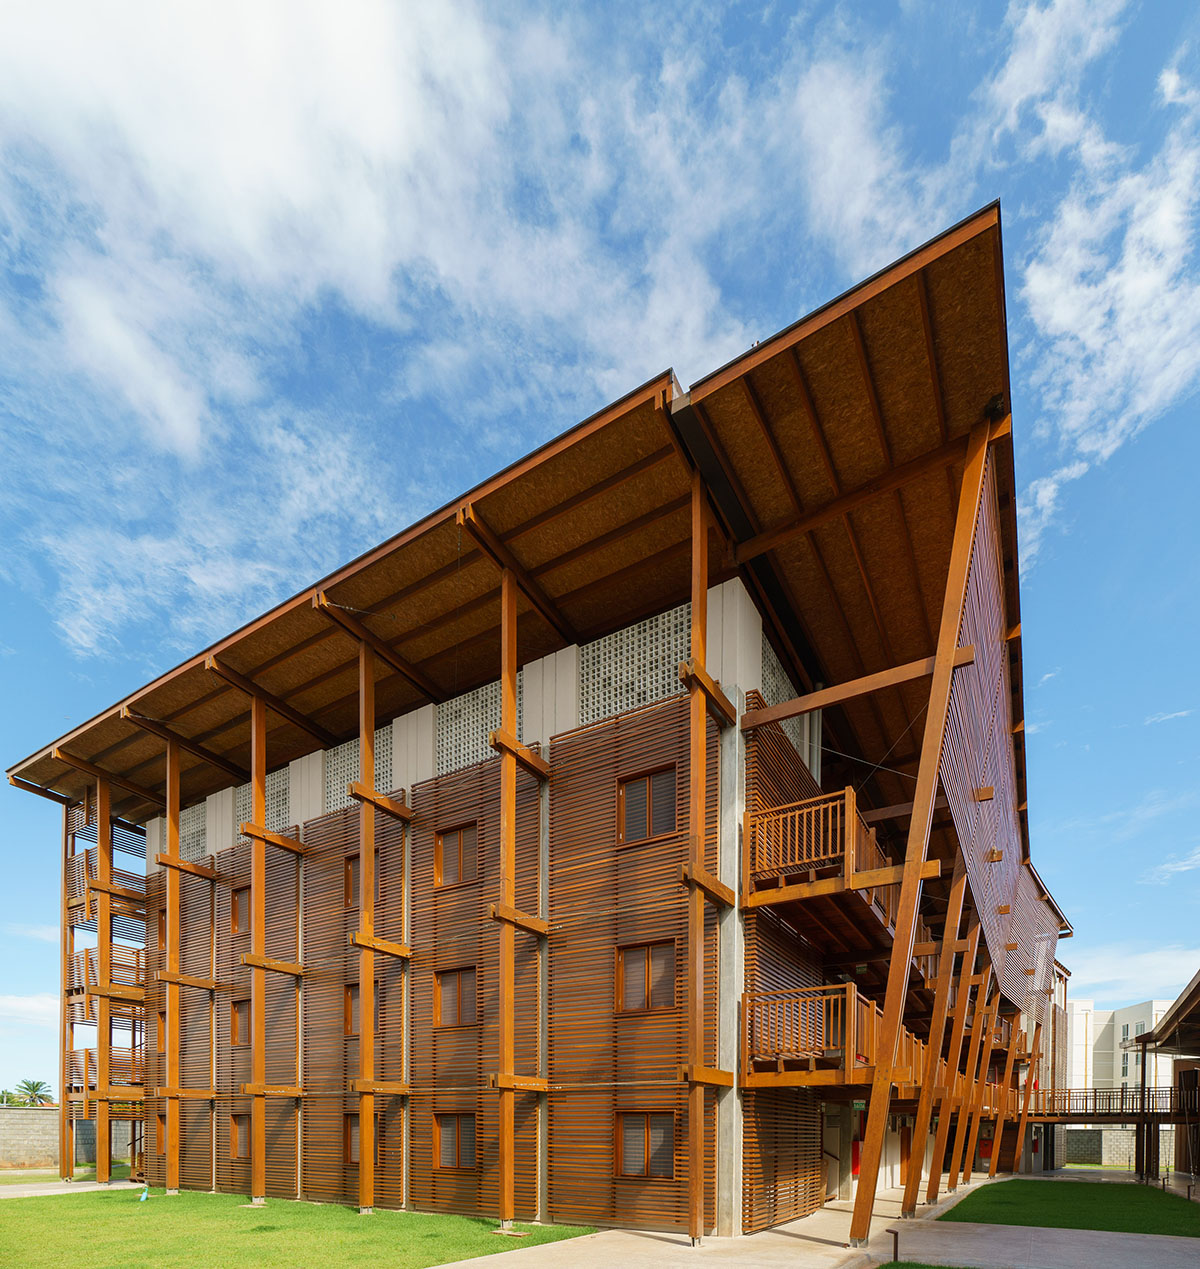 Conventual complex by Mixtura features wooden textures and artisanal details in Brazil 